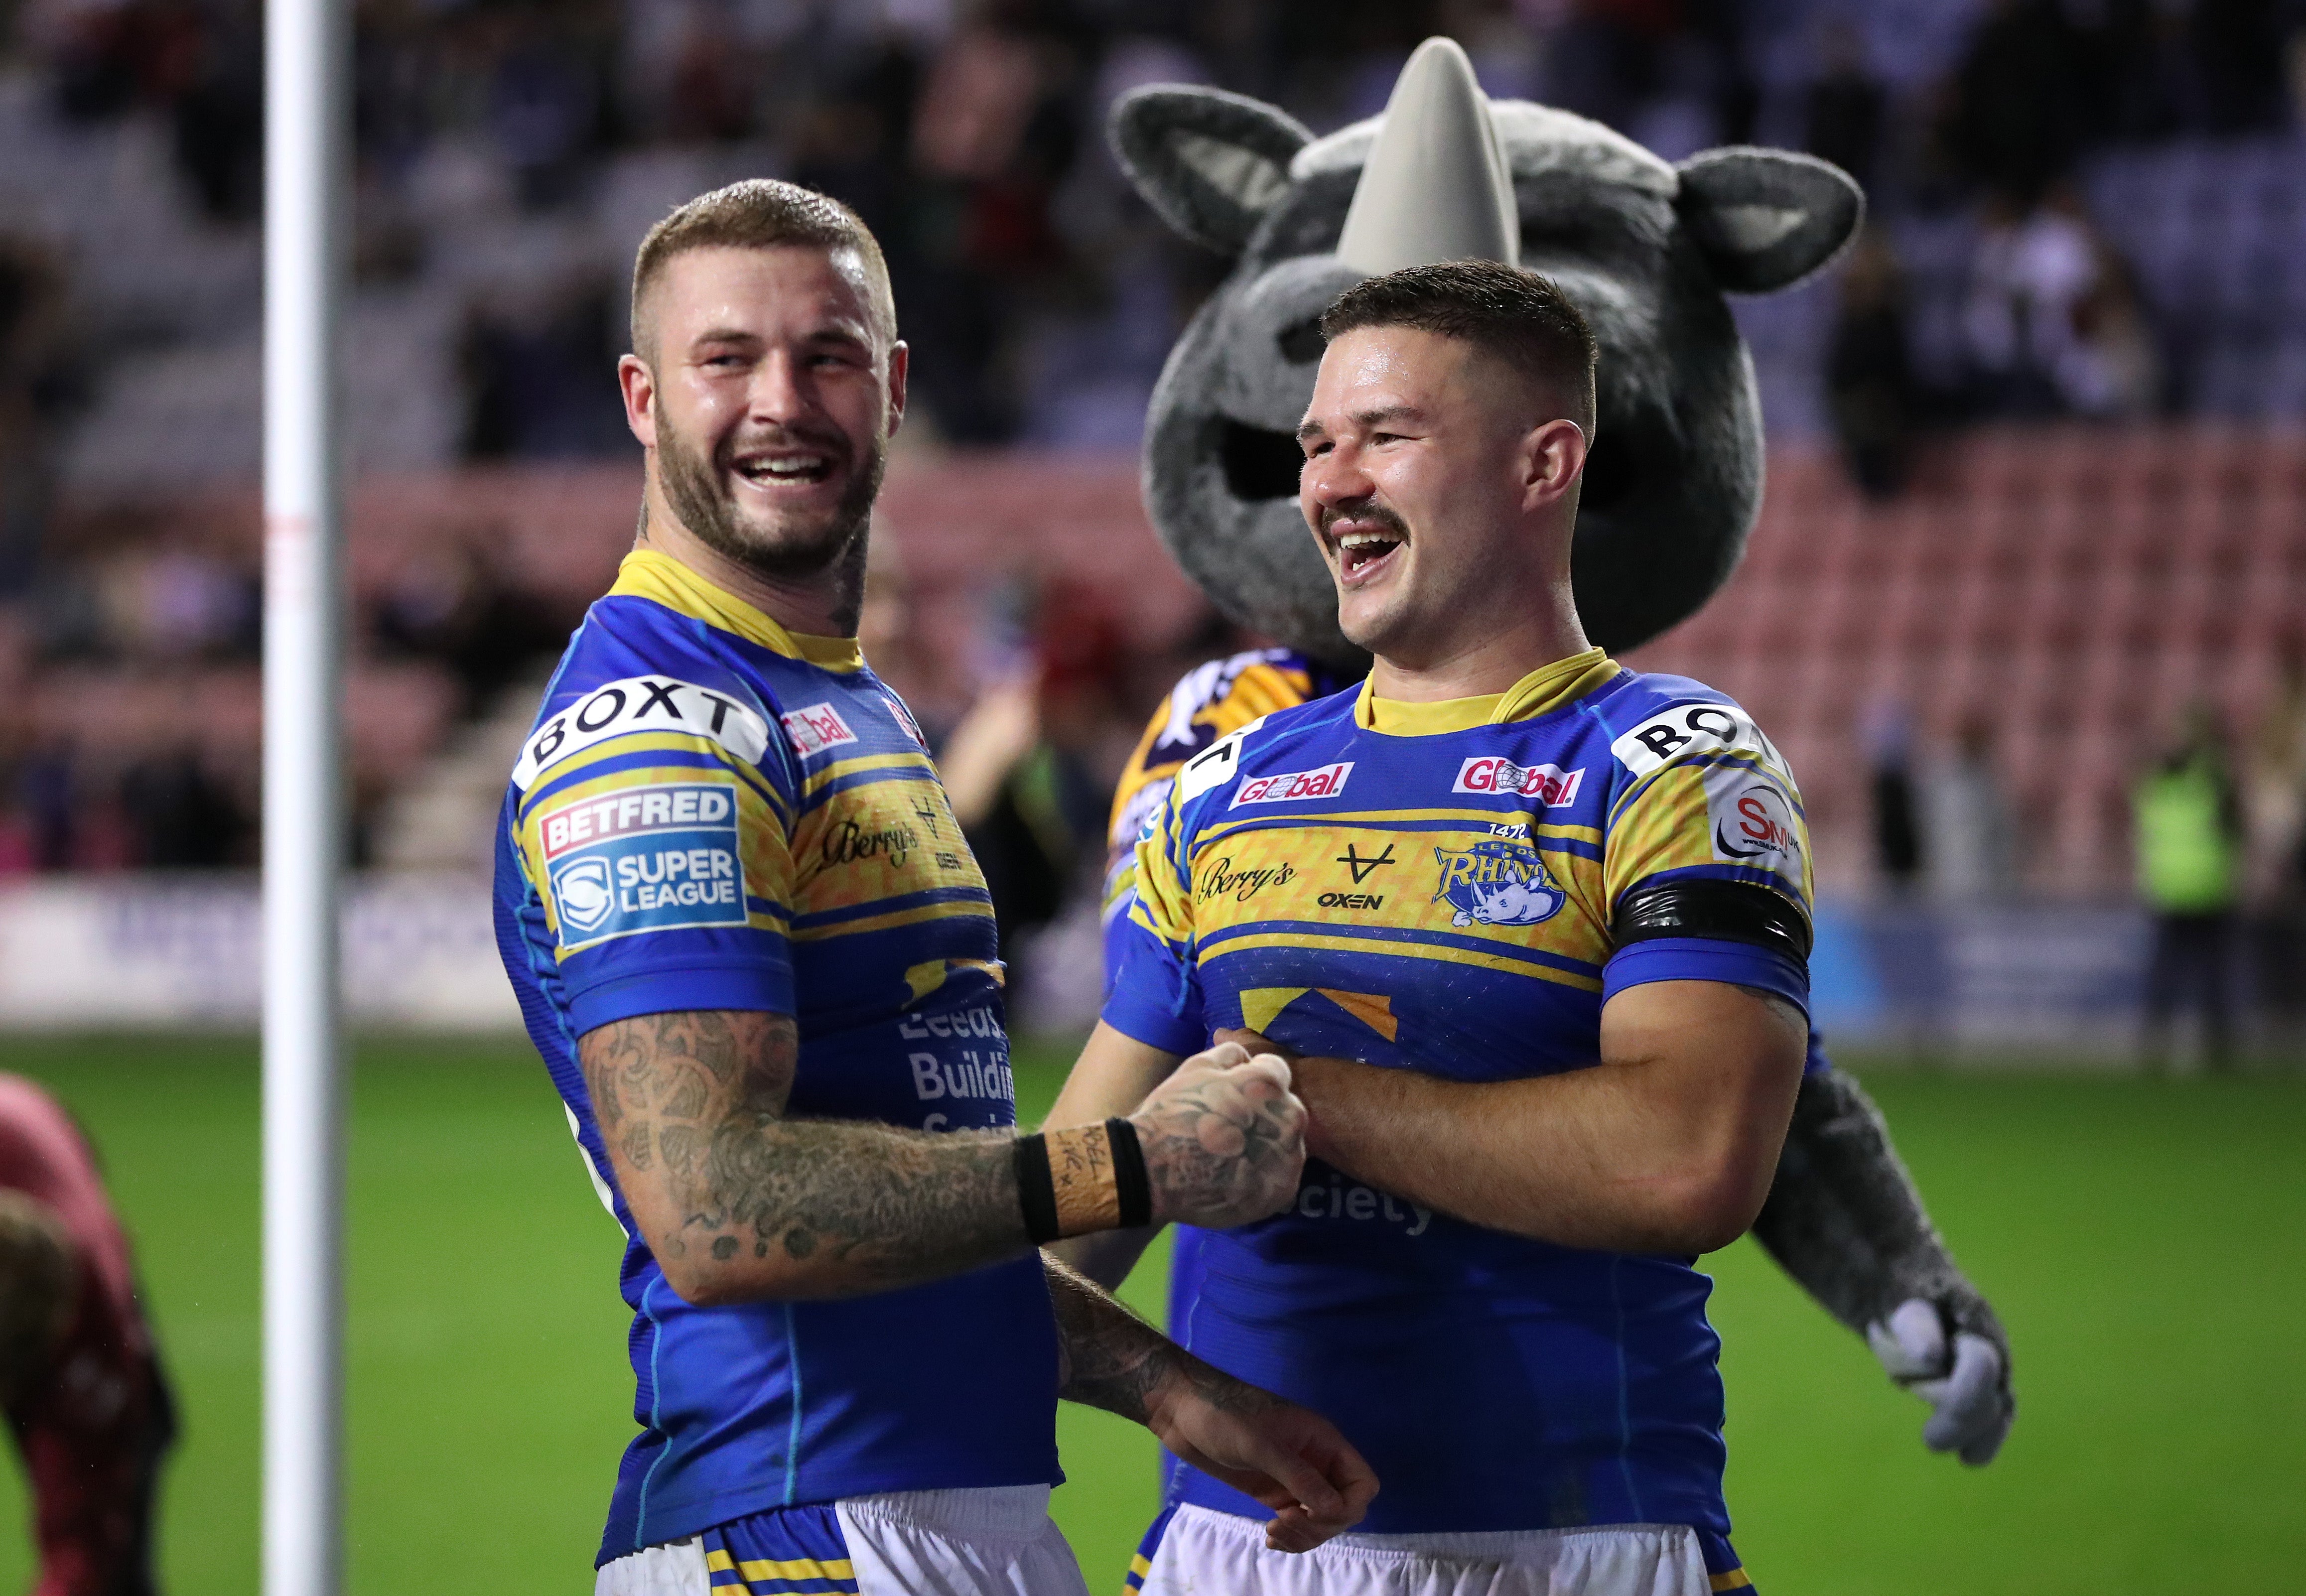 Super League Grand Final James Bentley ready to fulfil boyhood dream The Independent